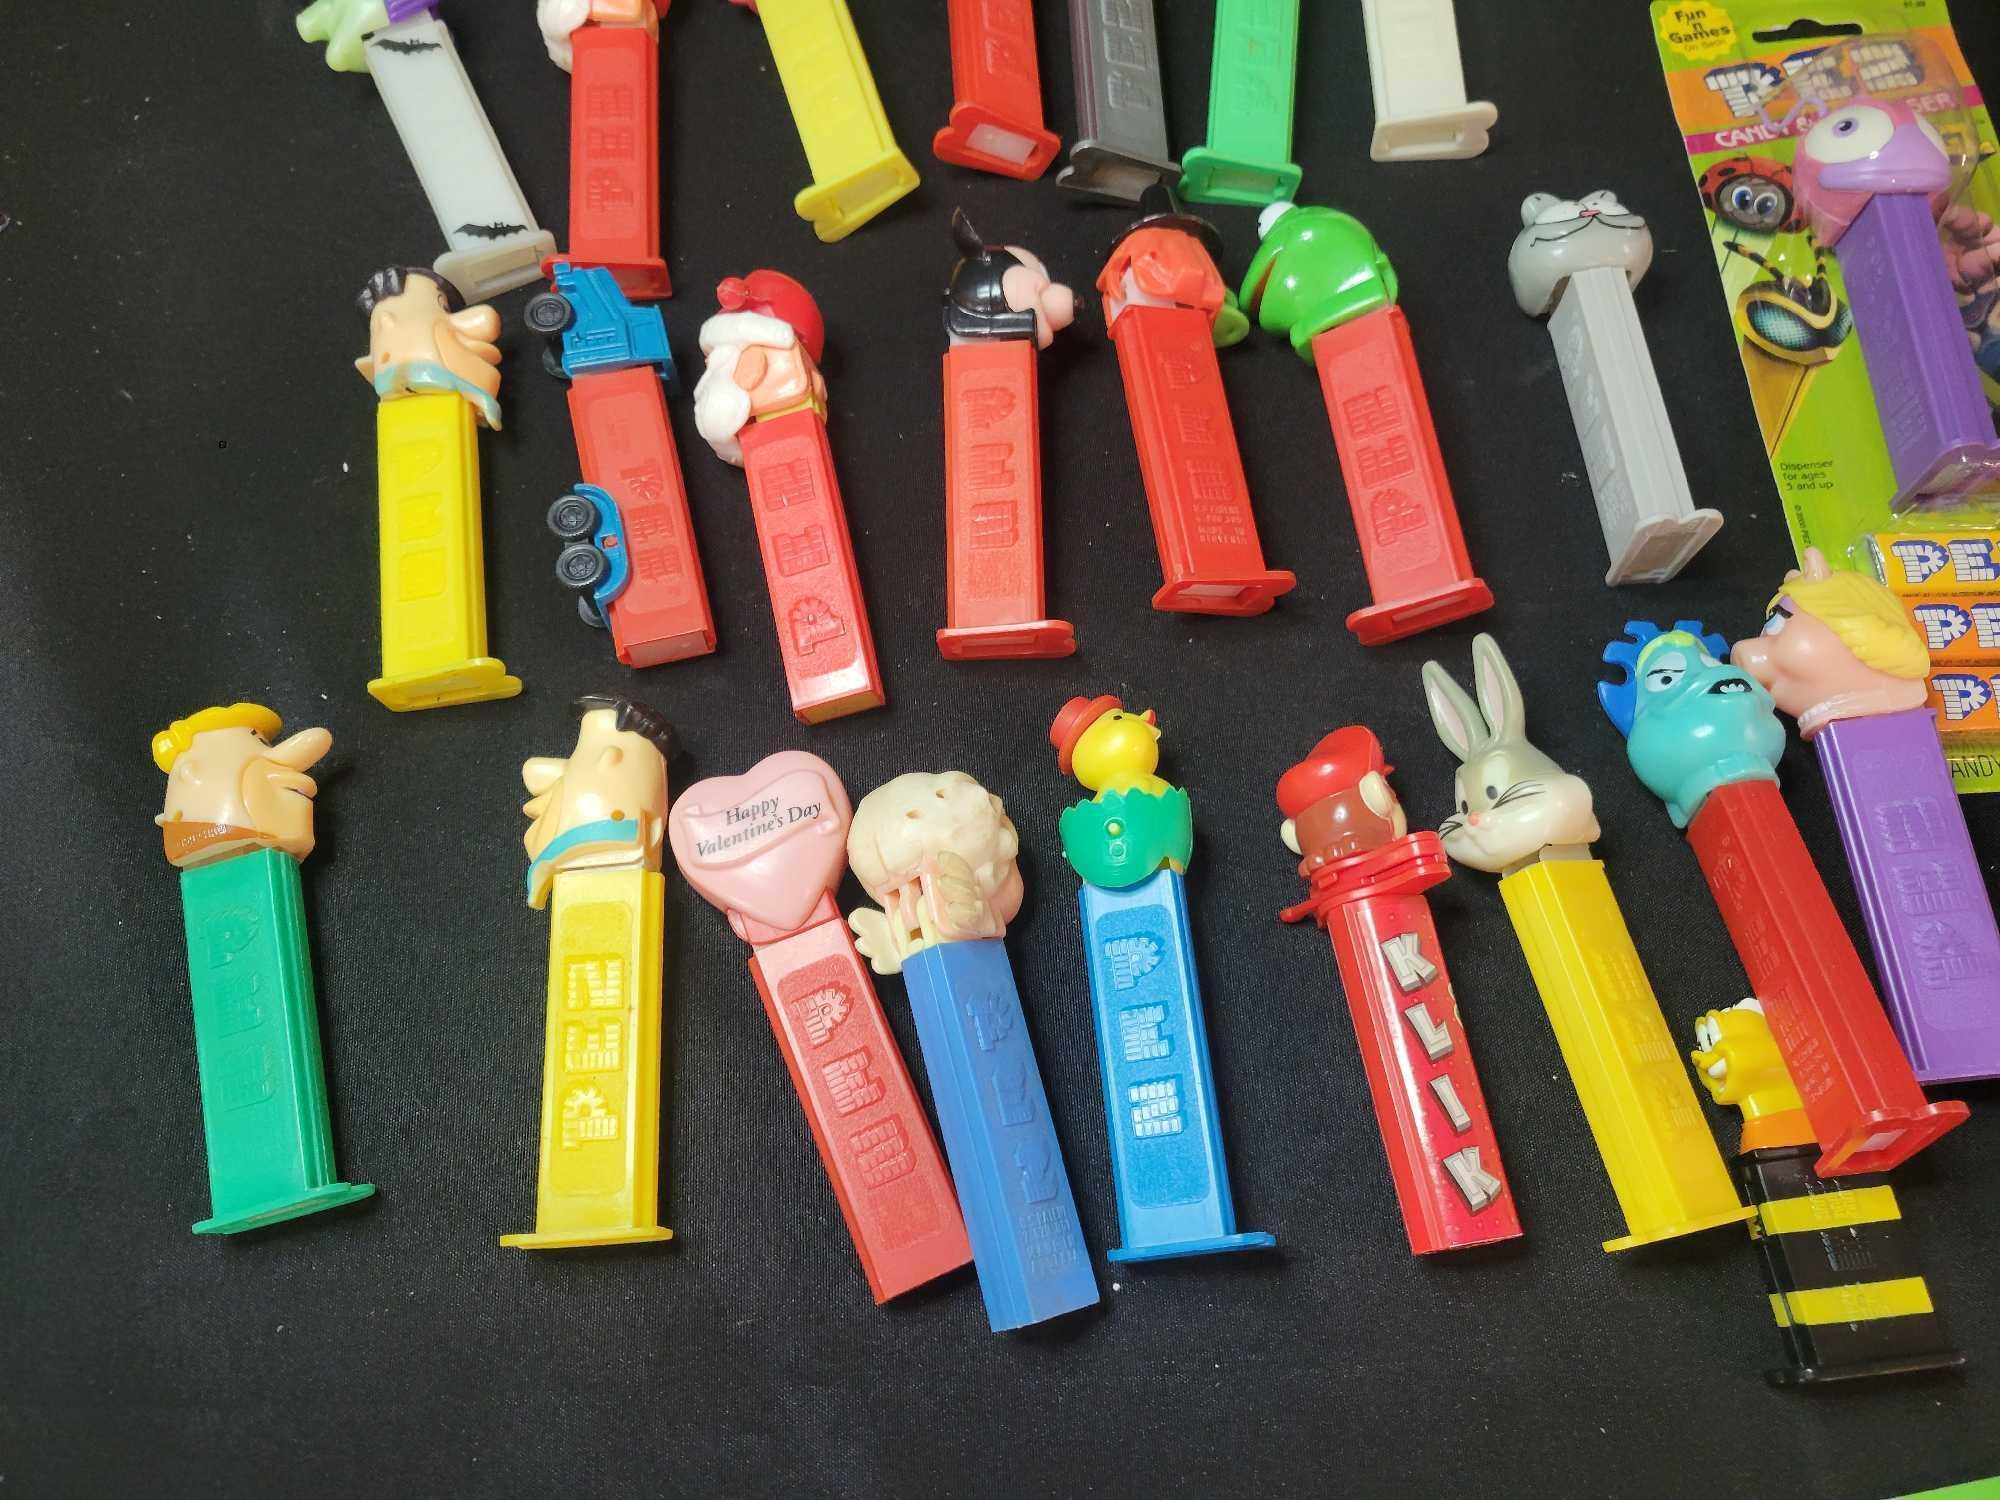 Large box of loose Pez and some in packs, Star Wars, Looney Tunes, Disney